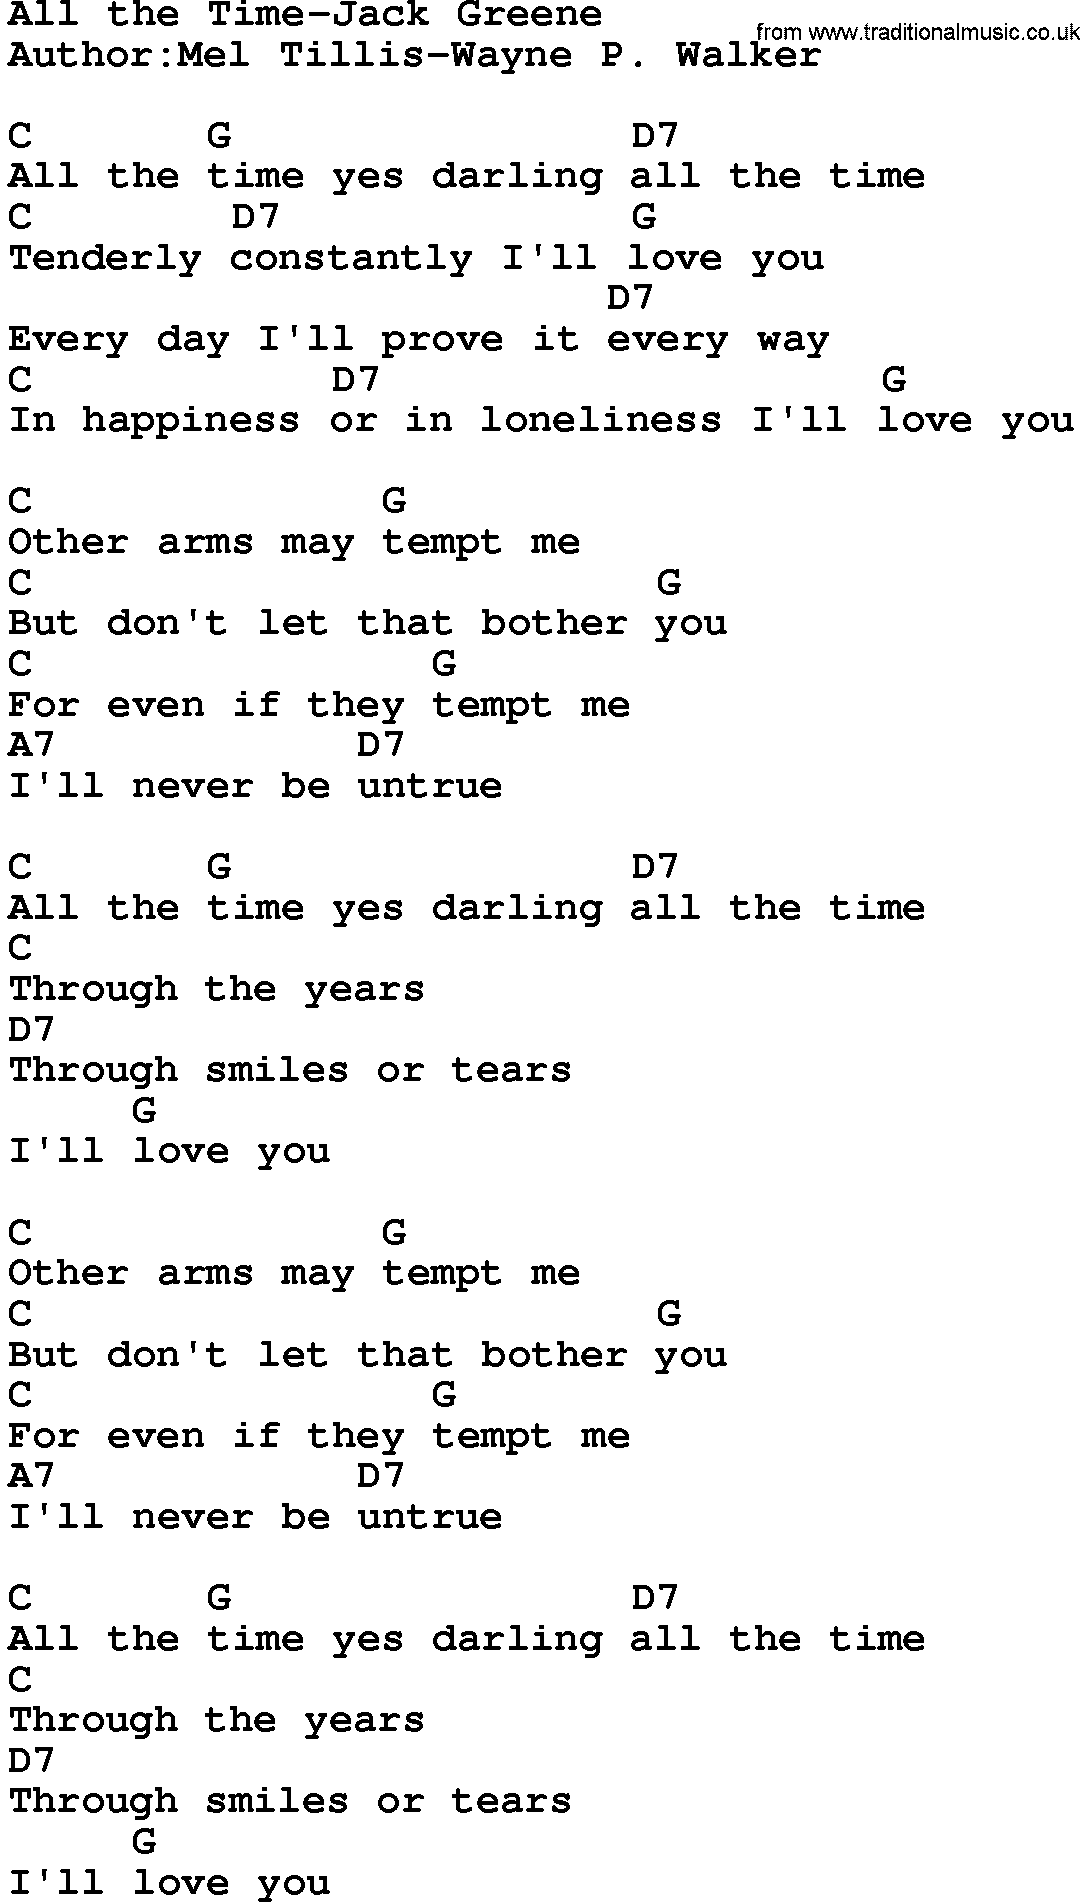 Country music song: All The Time-Jack Greene lyrics and chords